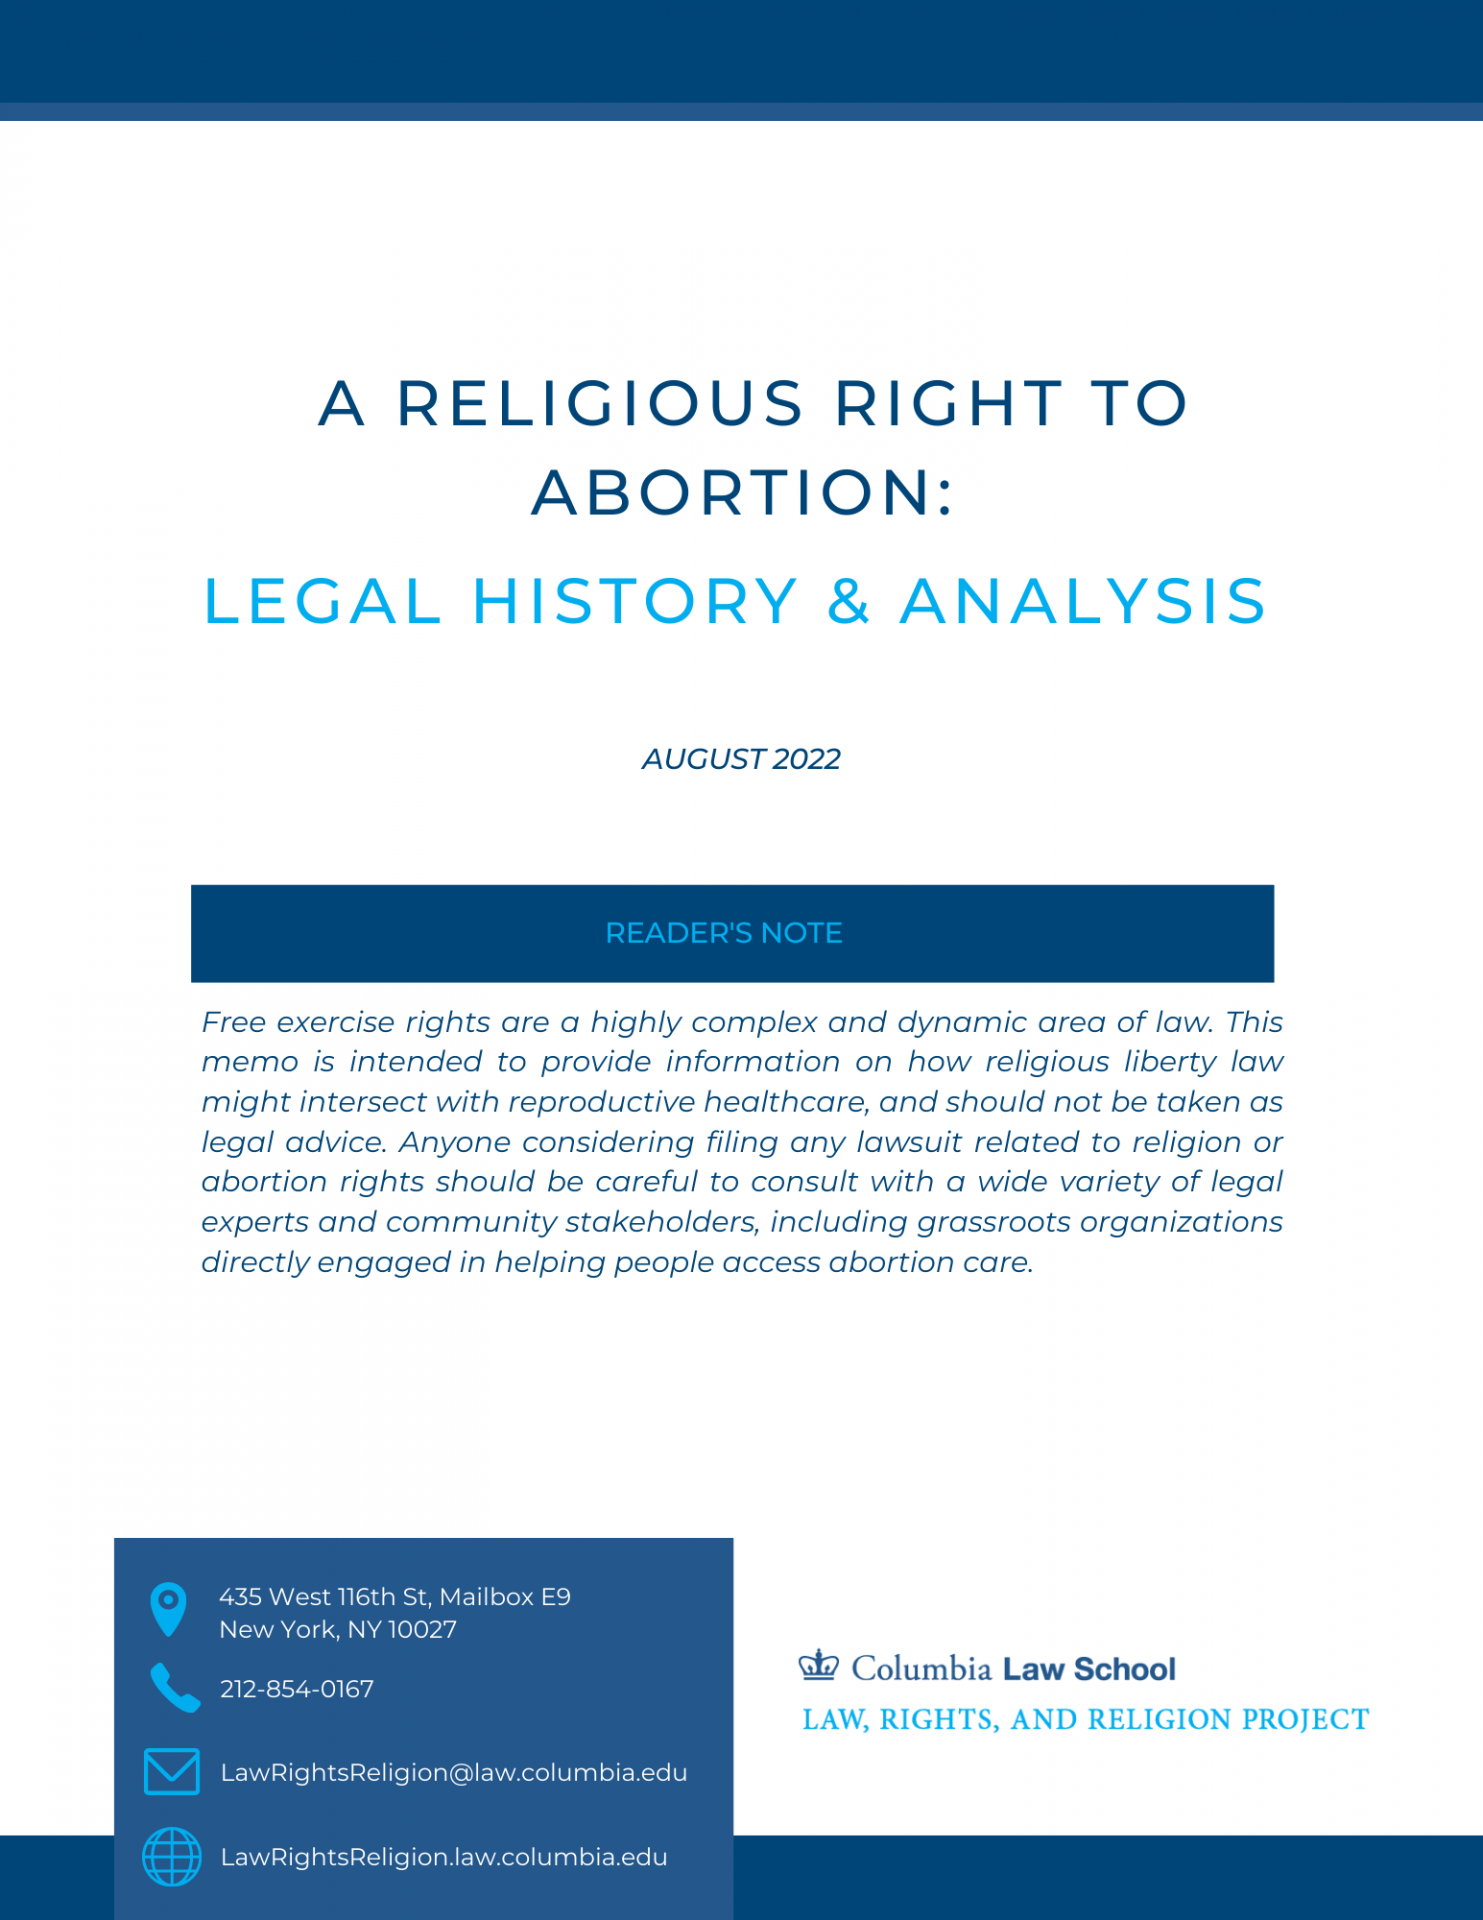 Cover page of the Religious Right to Abortion memo